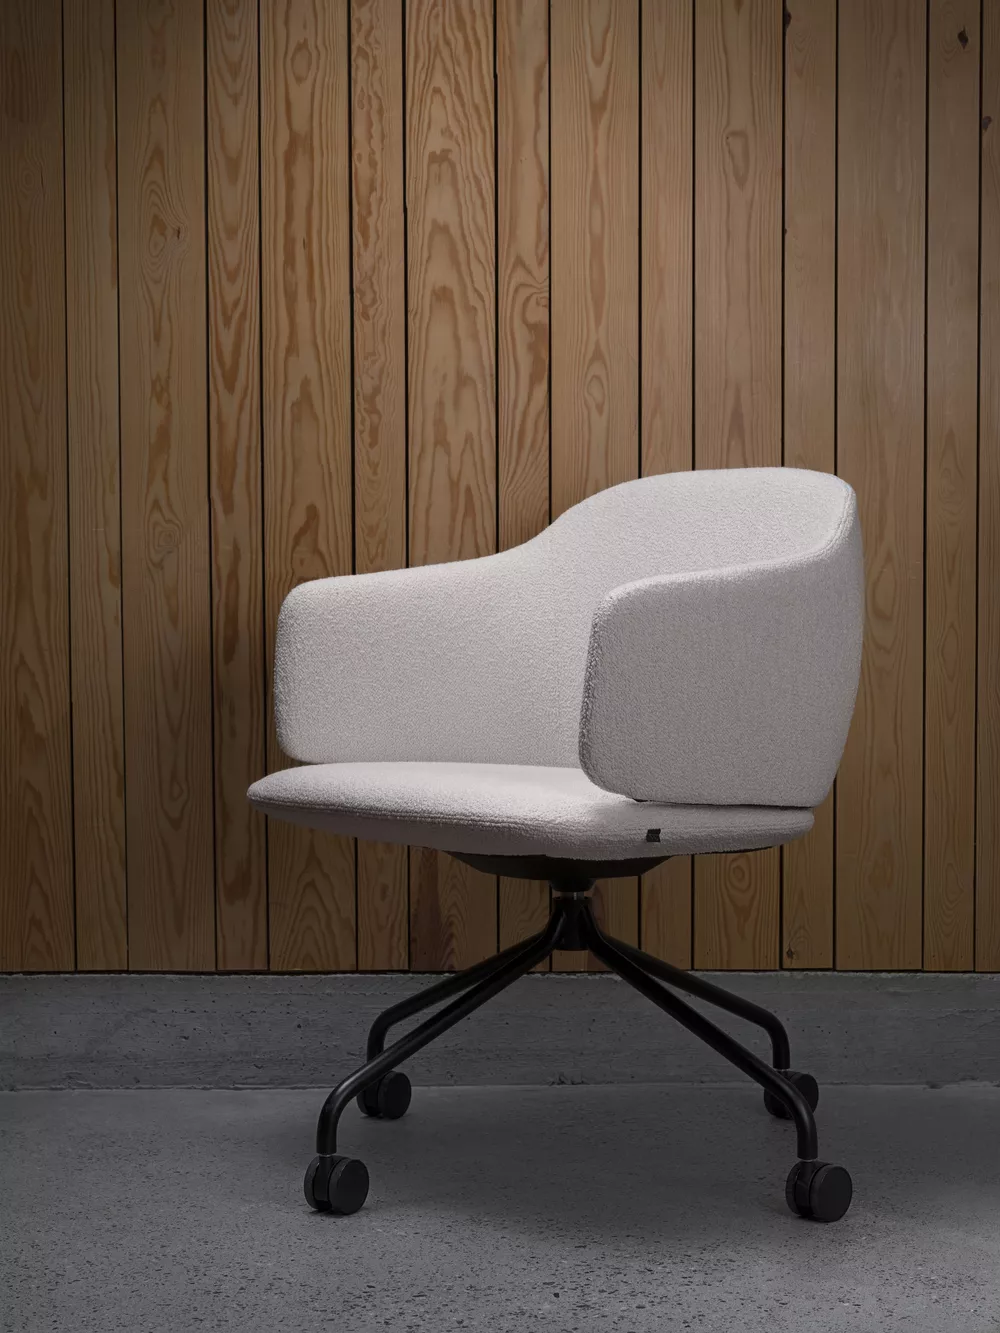 The soft Dwell conference chair from Fora Form